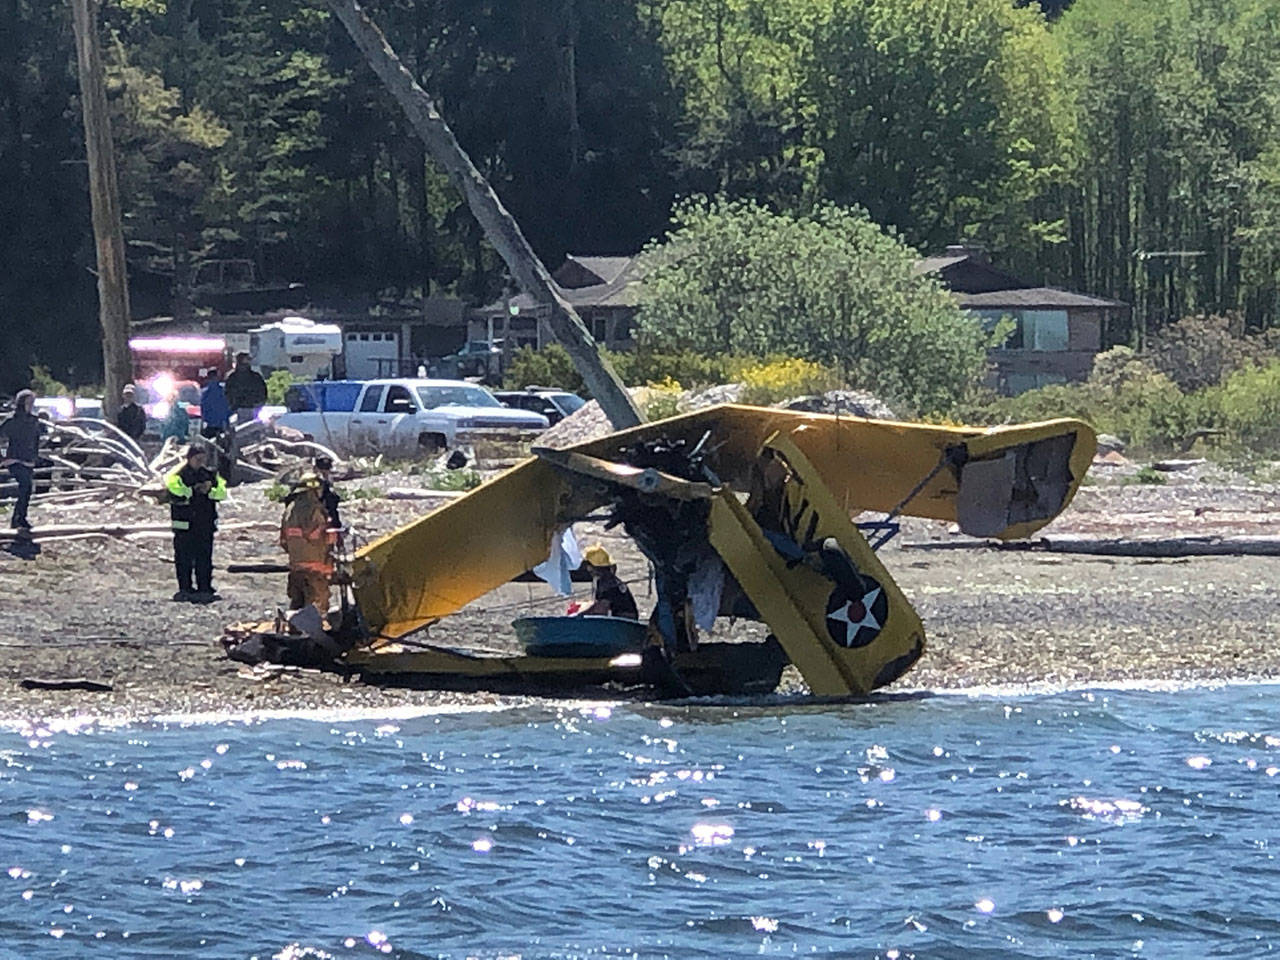 Two people were injured when this plane crashed on a Discovery Bay beach on Sunday. (Jefferson County Sheriff’s Office)